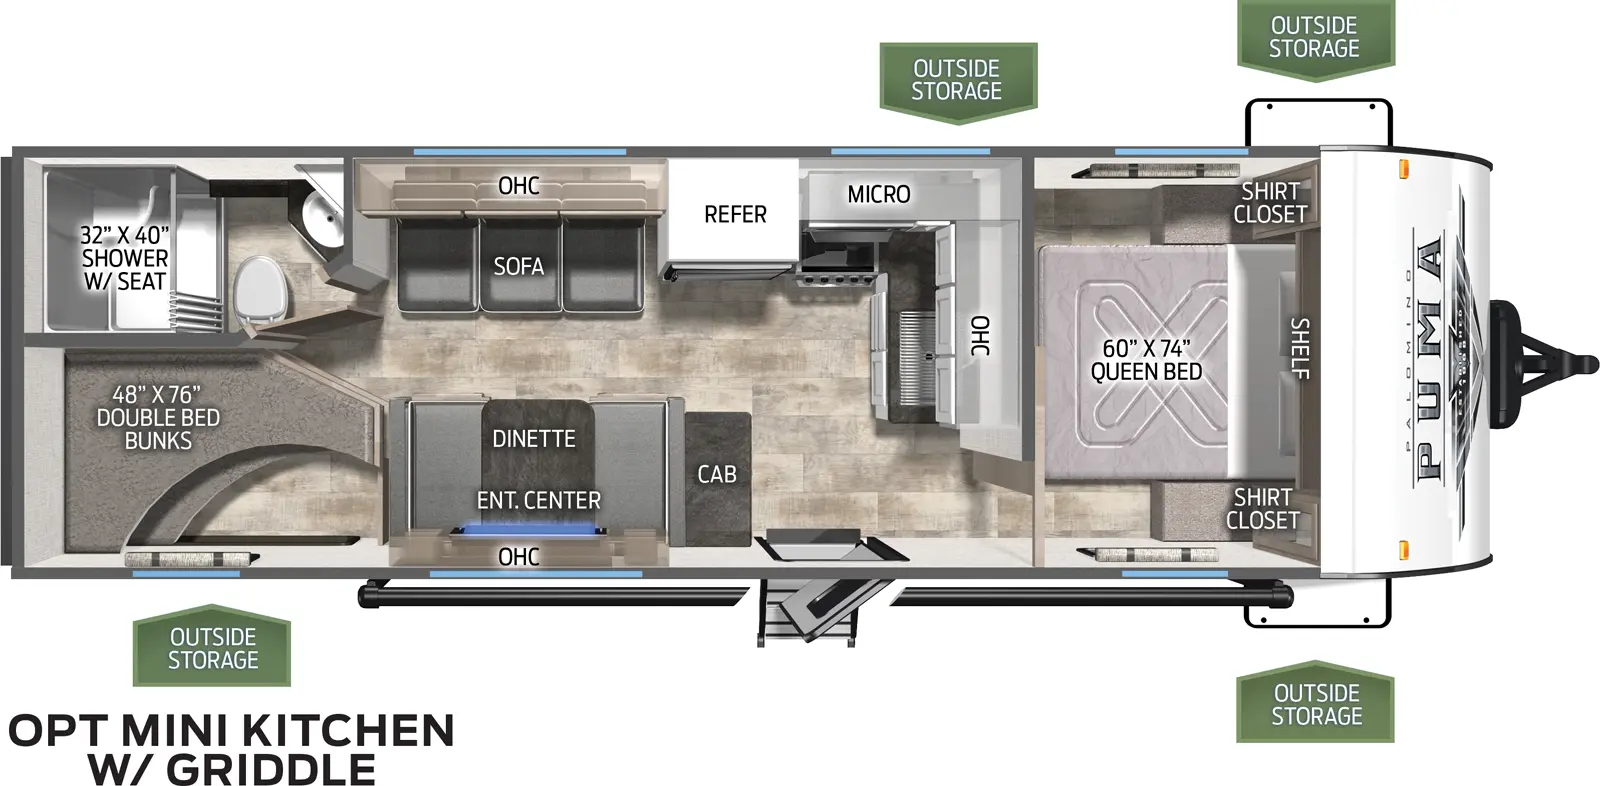 The 23BHQ has zero slideouts and one entry. Exterior features outside storage. Interior layout front to back: foot-facing queen bed with shelf above, and shirt closets on each side; kitchen counter and overhead cabinet wrap from inner wall to off-door side with microwave, cooktop and refrigerator; door side entry, cabinet, and dinette with overhead cabinet and entertainment center; rear off-door side full bathroom with shower with seat; rear door side double bed bunks.